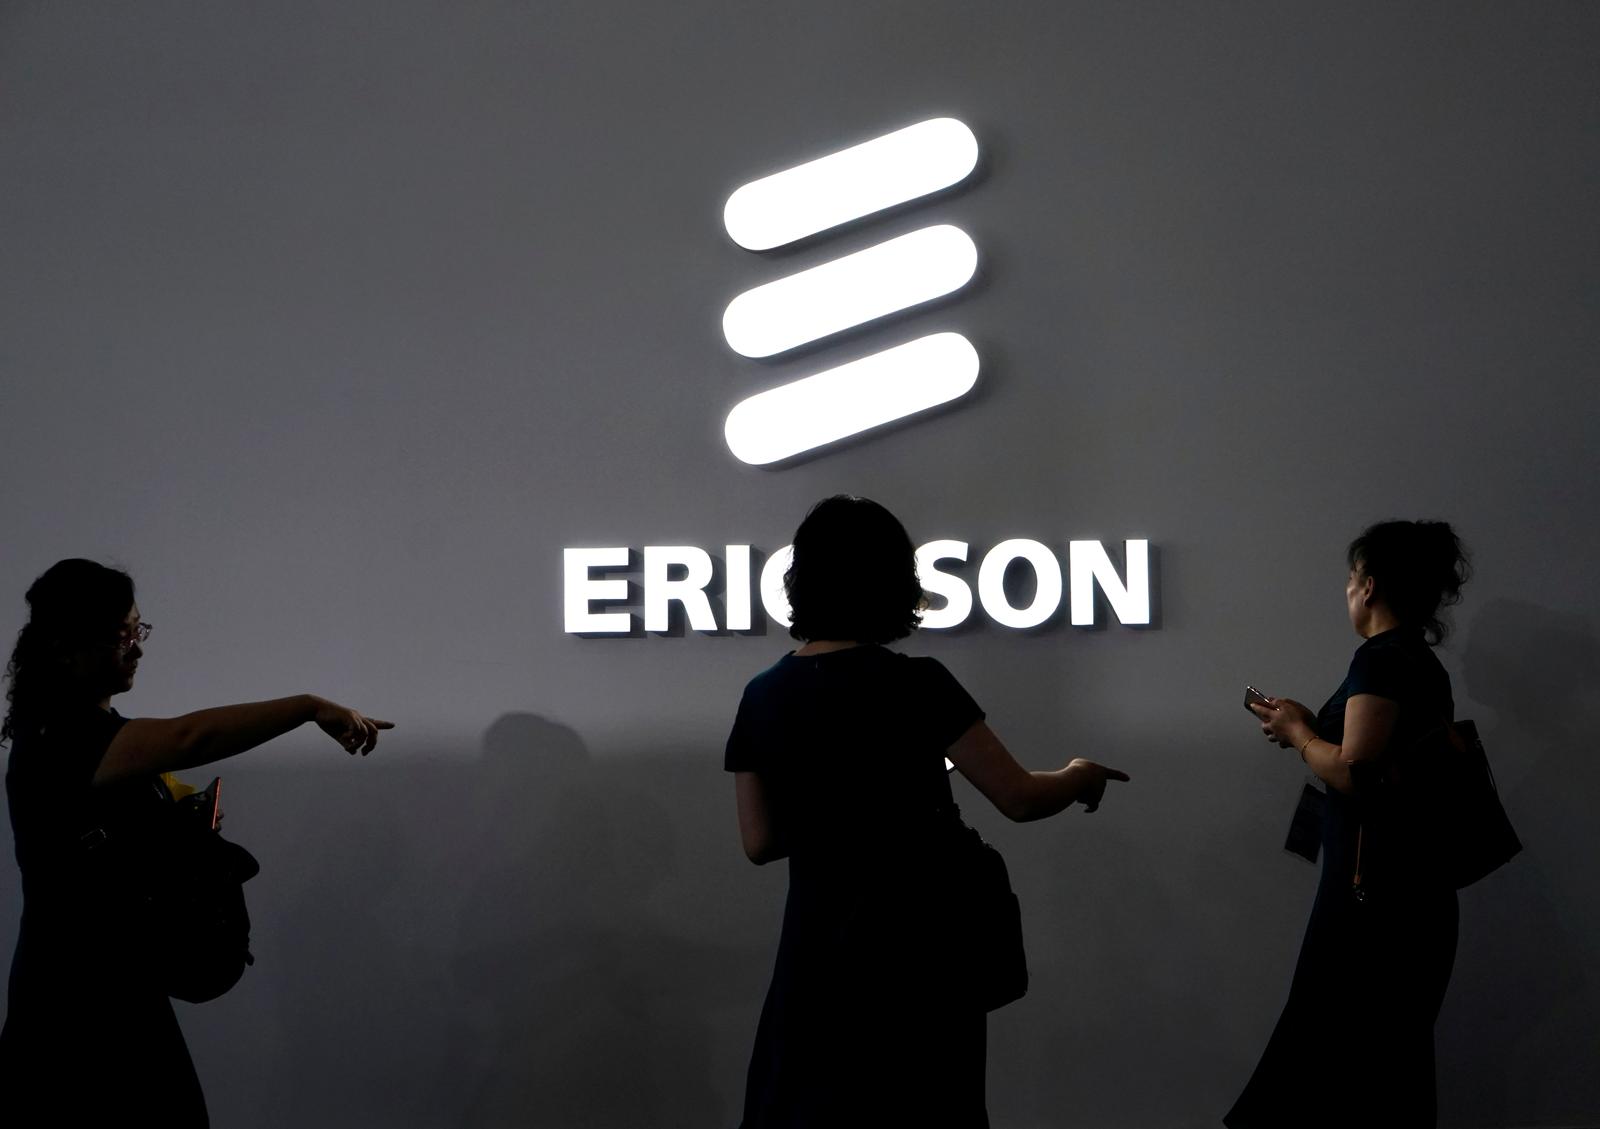 Ericsson agrees to pay over $1 billion to resolve U.S. corruption probes